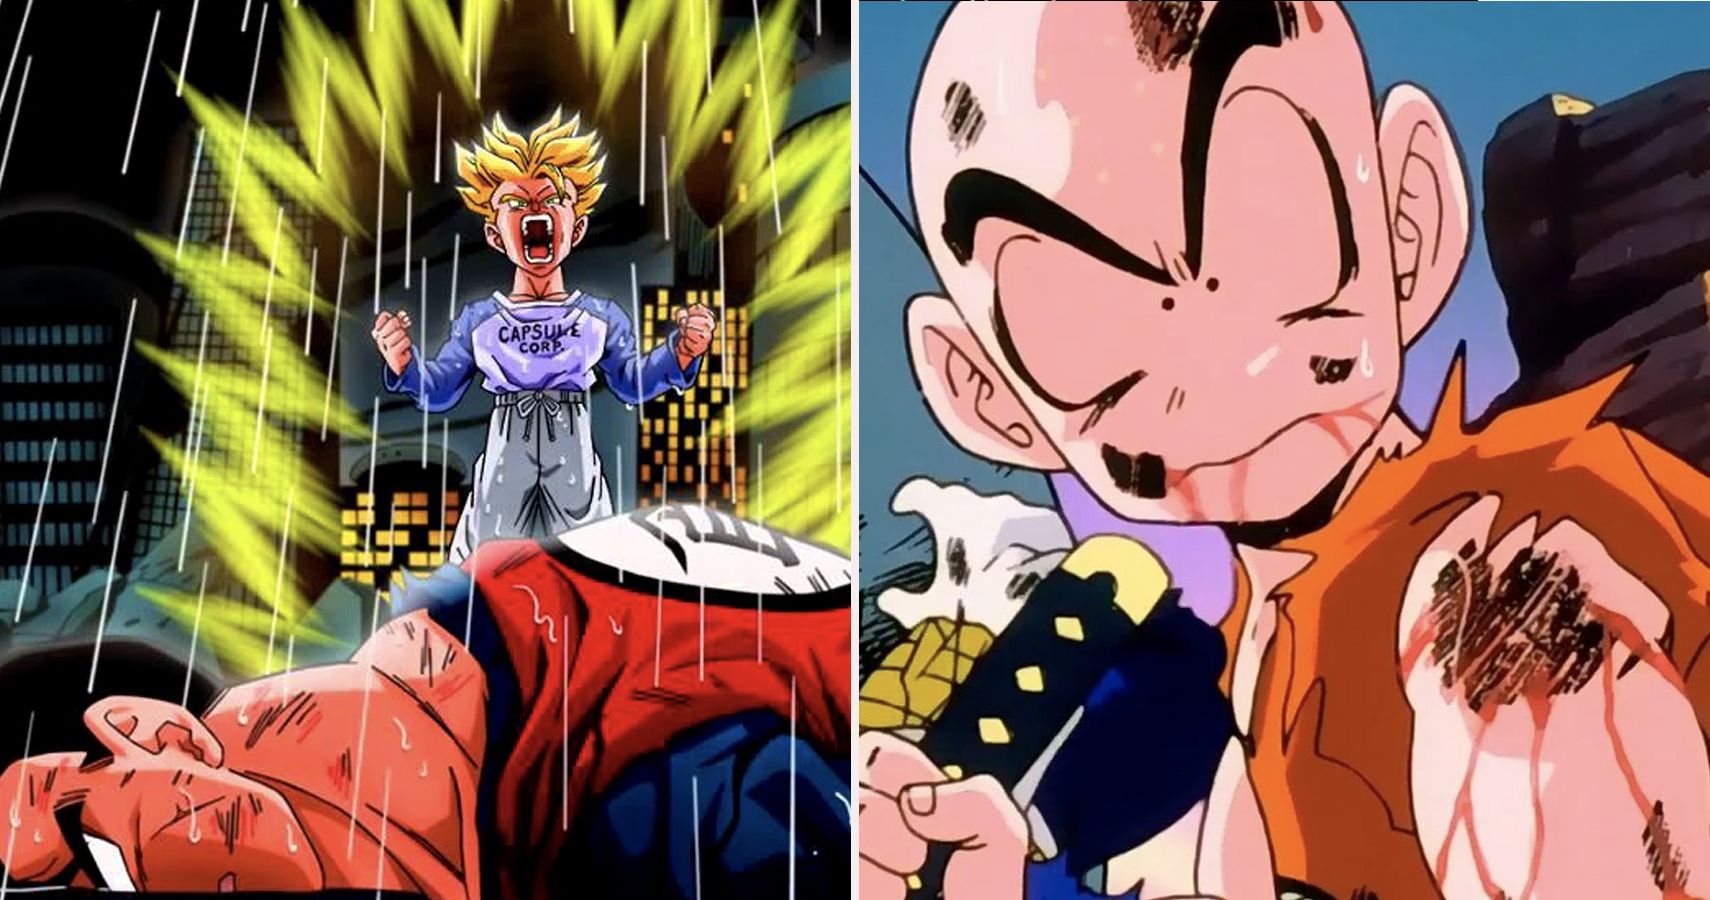 Dragon Ball GT was just as amazing as Dragon Ball and Dragon Ball Z! Too  bad it ended